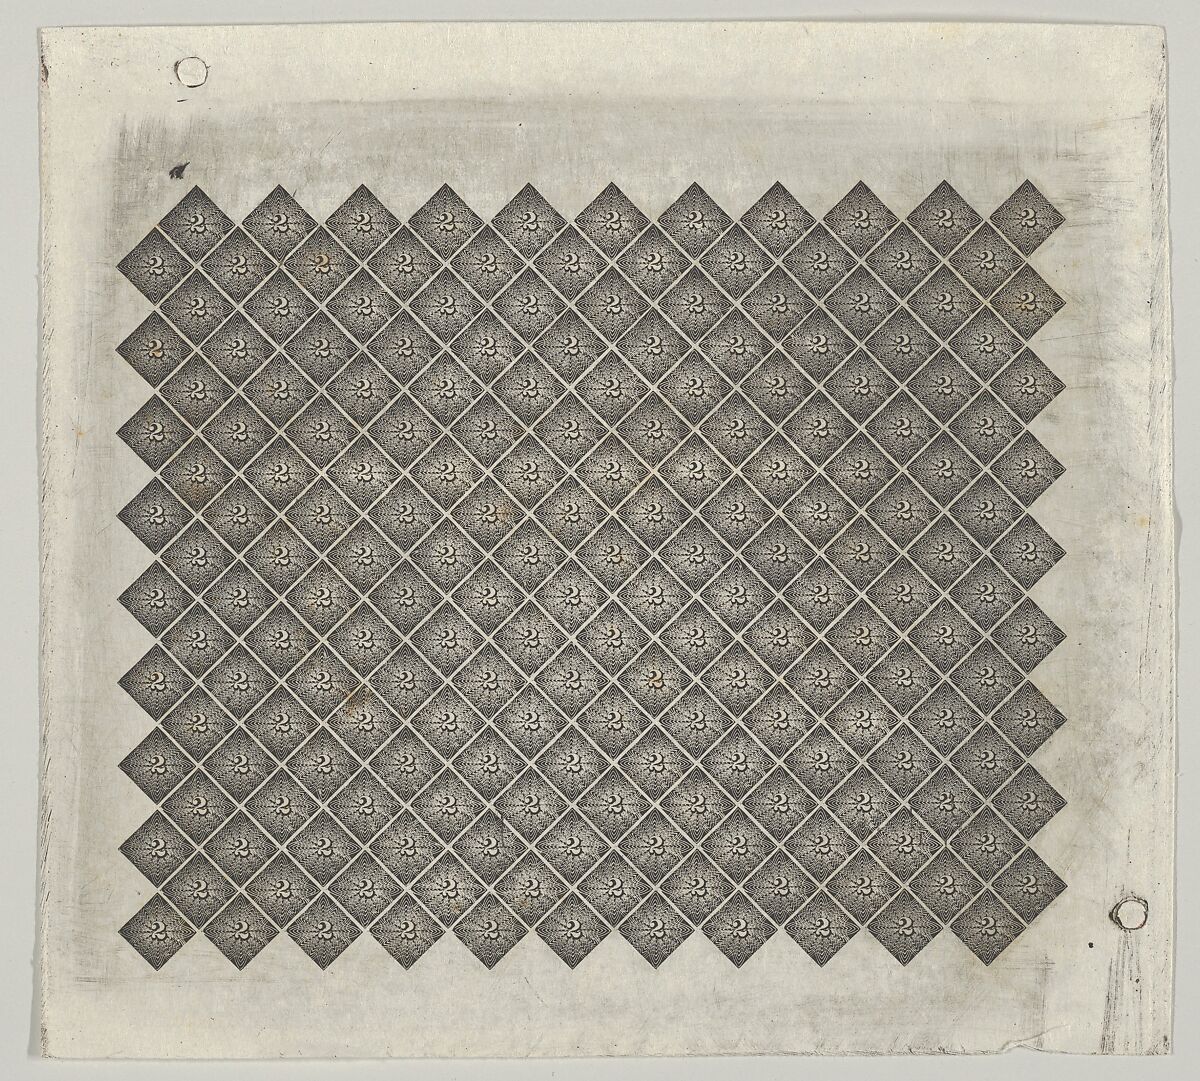 Banknote motif: panel of lathe work ornament composed of tiny 2s each set in a diamond surrounded by a star, Associated with Cyrus Durand (American, 1787–1868), Engraving; proof 